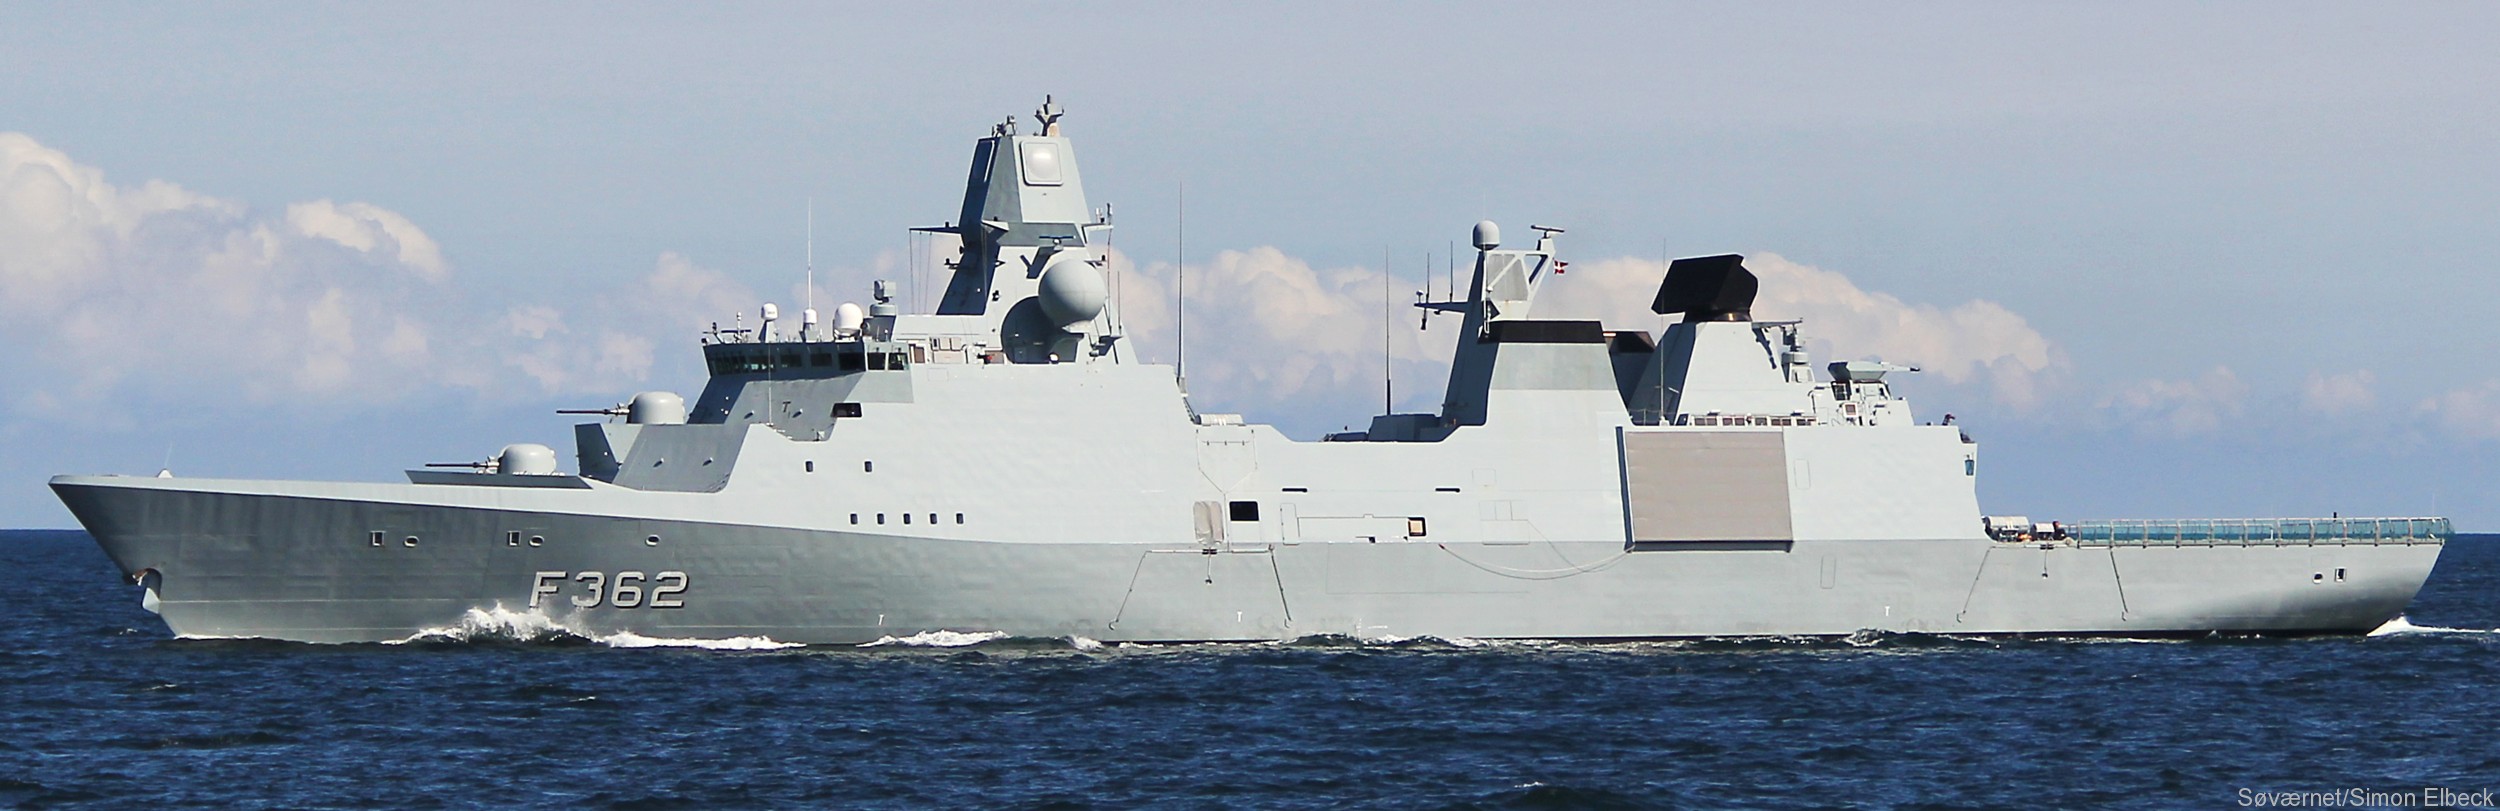 f-362 hdms peter willemoes iver huitfeldt class guided missile frigate ffg royal danish navy 28